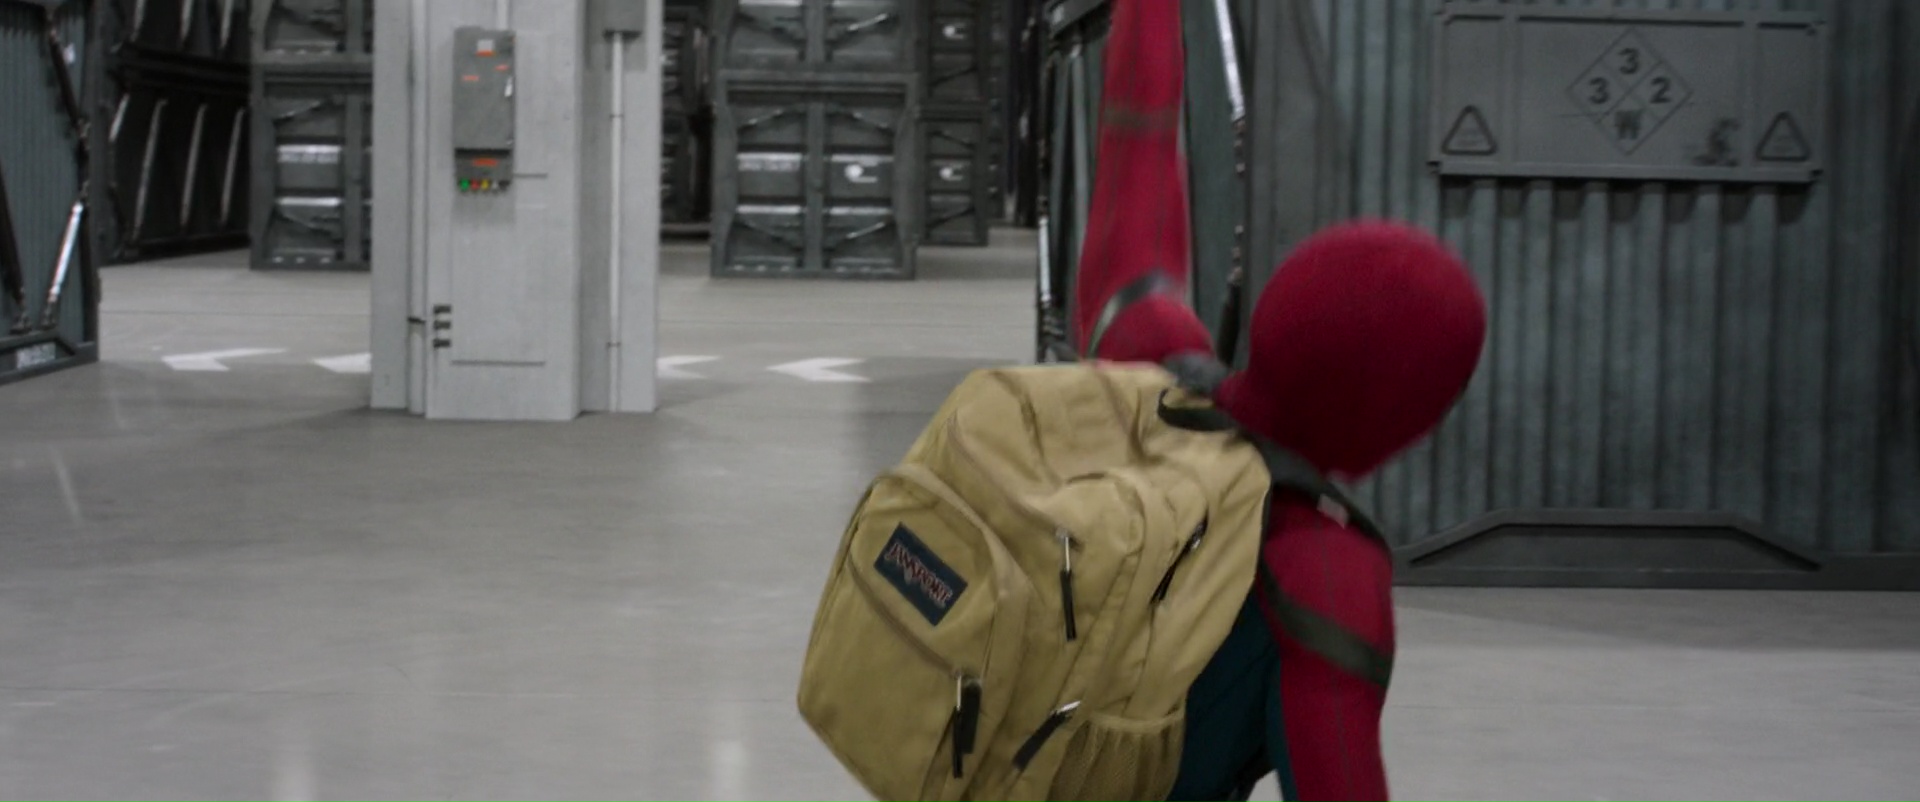 JanSport Backpack Worn by Tom Holland in Spider-Man: Homecoming (2017) Movie1920 x 802